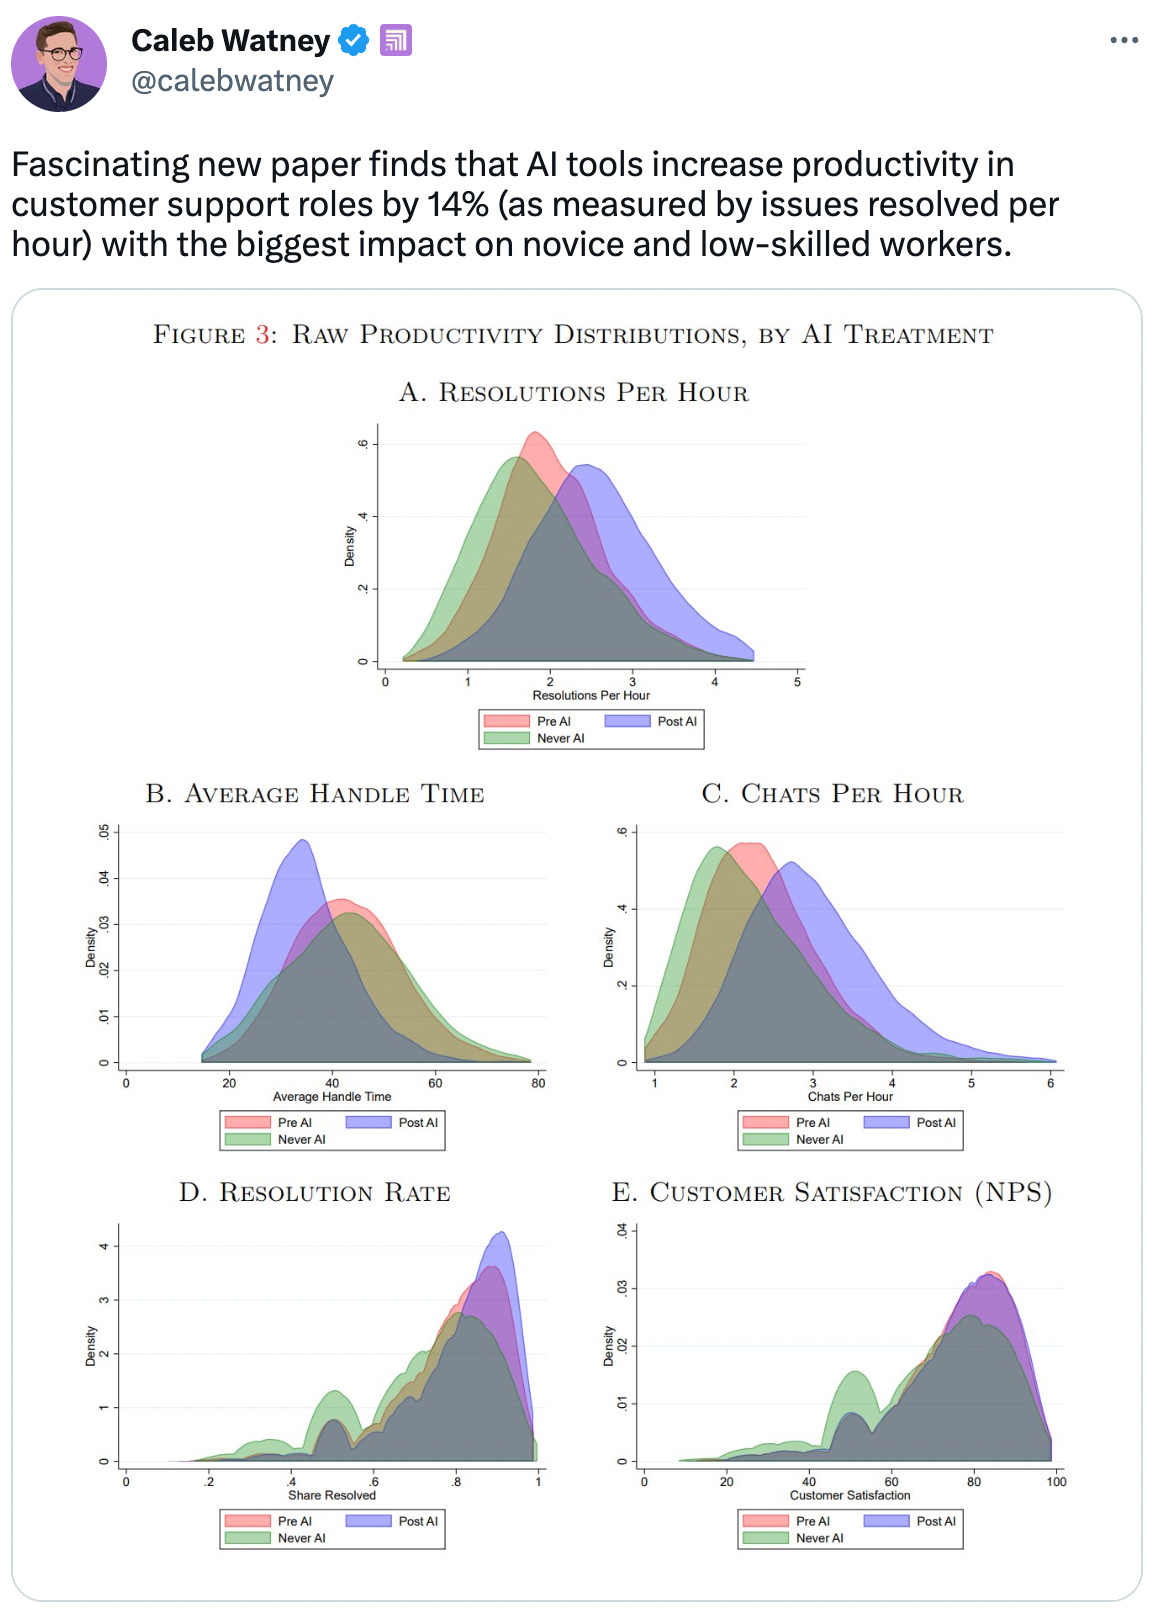  Caleb Watney  @calebwatney Fascinating new paper finds that AI tools increase productivity in customer support roles by 14% (as measured by issues resolved per hour) with the biggest impact on novice and low-skilled workers.